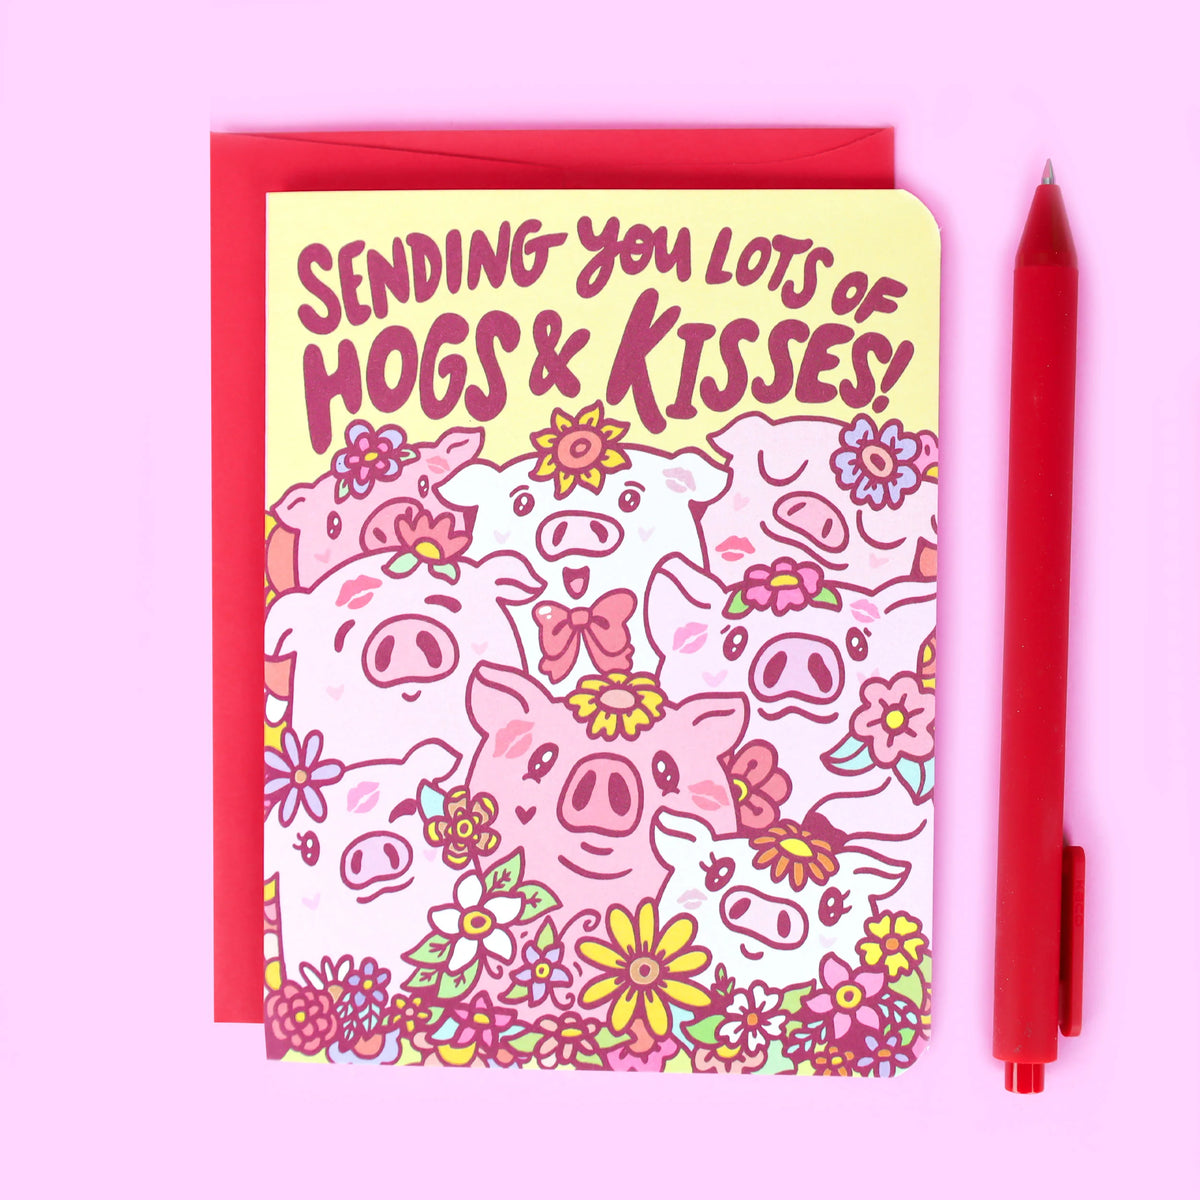 Hogs And Kisses Pigs Greeting Card Cover